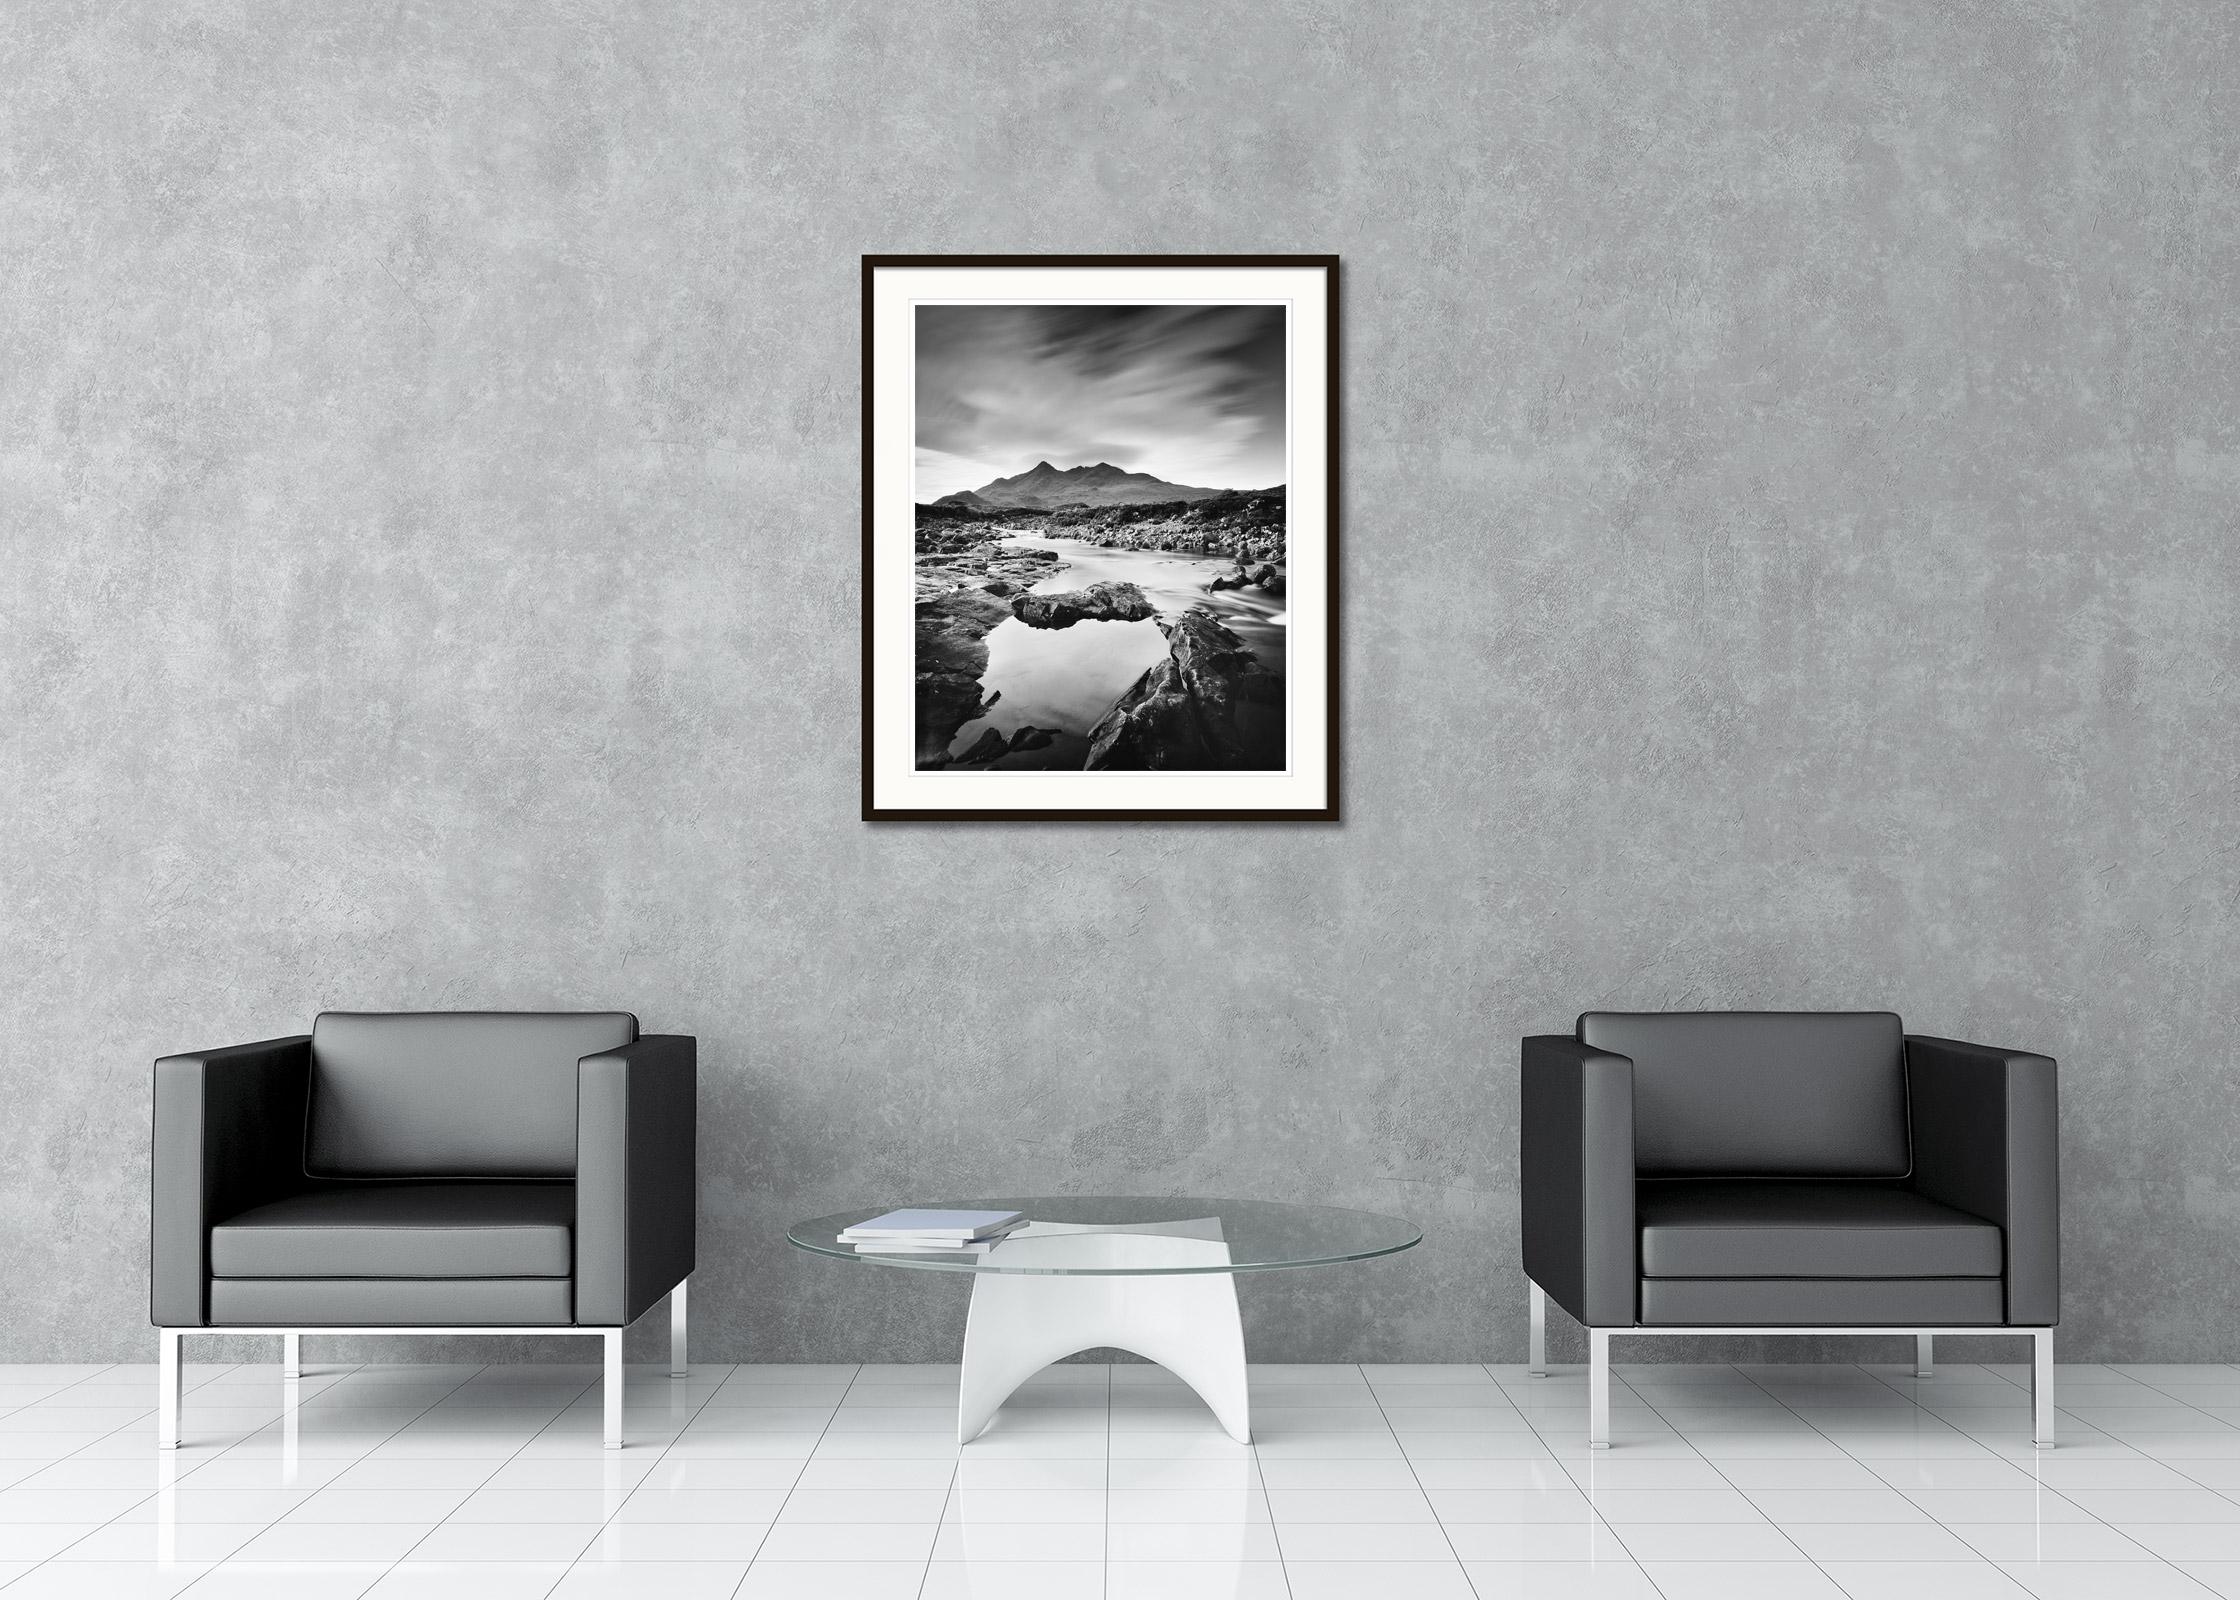 Black Cuillin Hills Mountains Scotland black and white landscape art photography For Sale 1